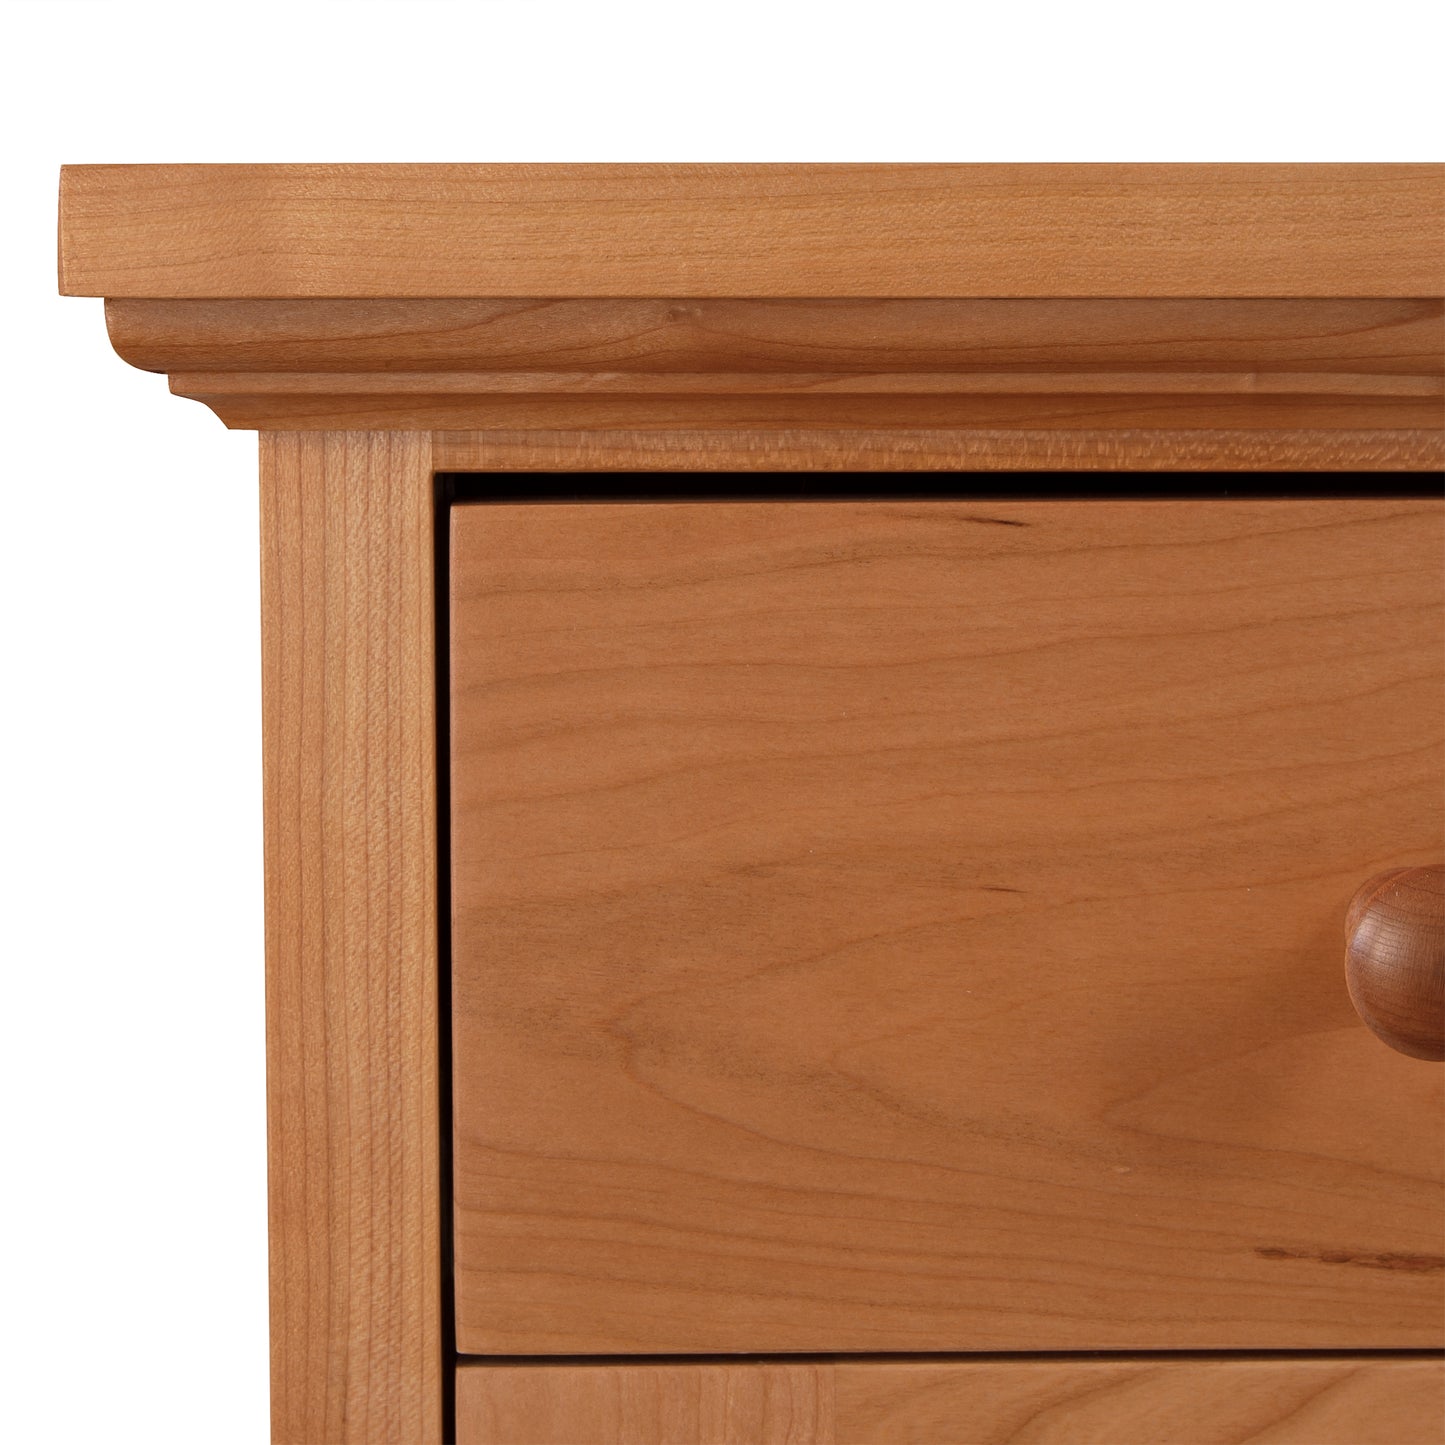 A close up of a Classic Country Buffet with a knob showcasing Lyndon Furniture craftsmanship and country style.